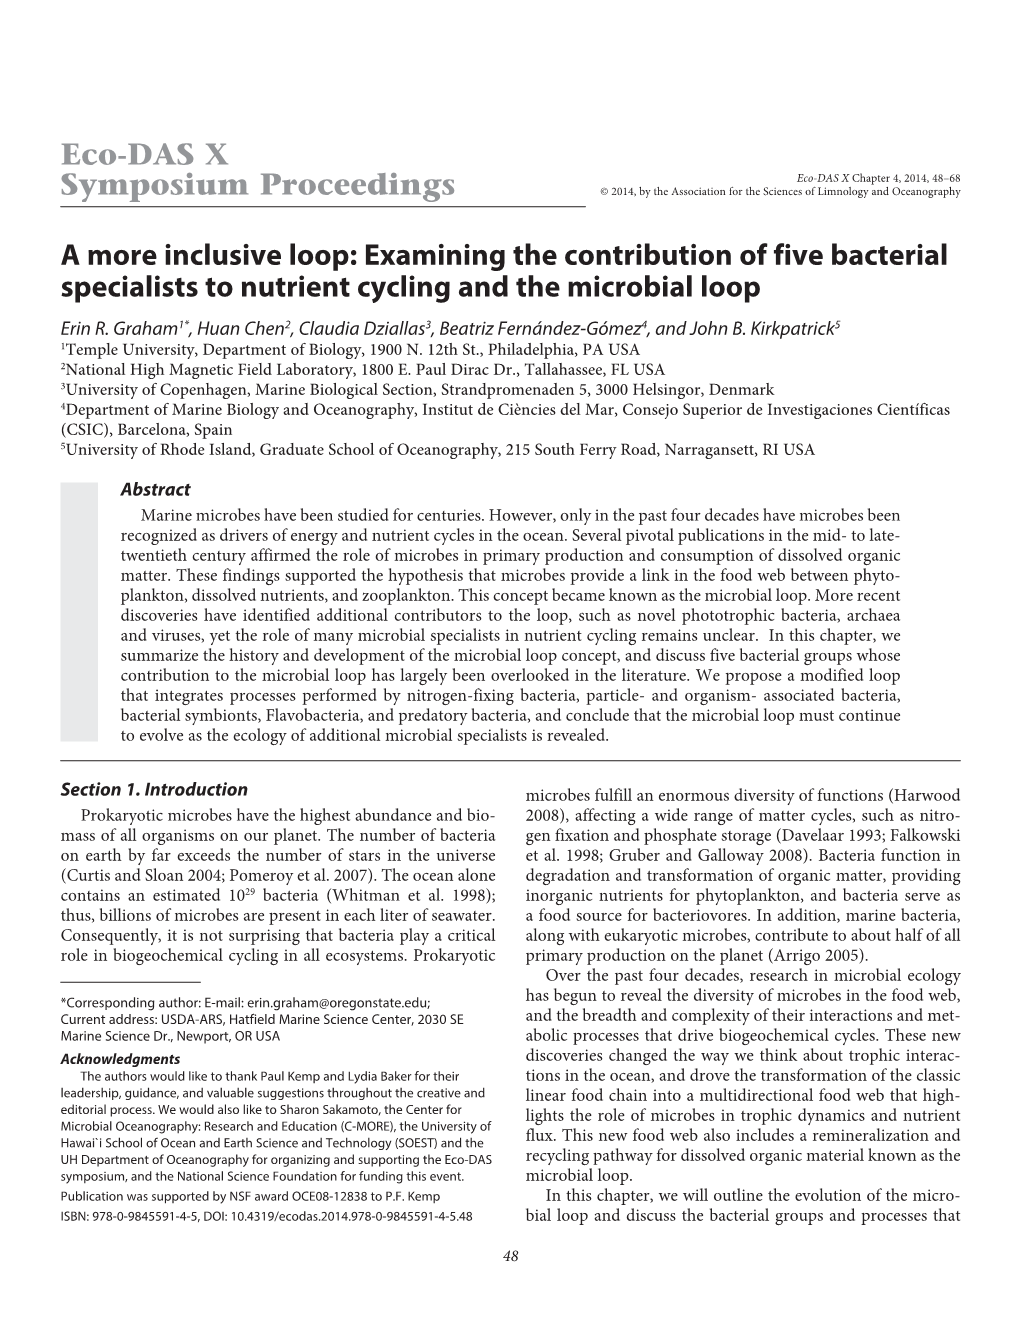 A More Inclusive Loop: Examining the Contribution of Five Bacterial Specialists to Nutrient Cycling and the Microbial Loop Erin R